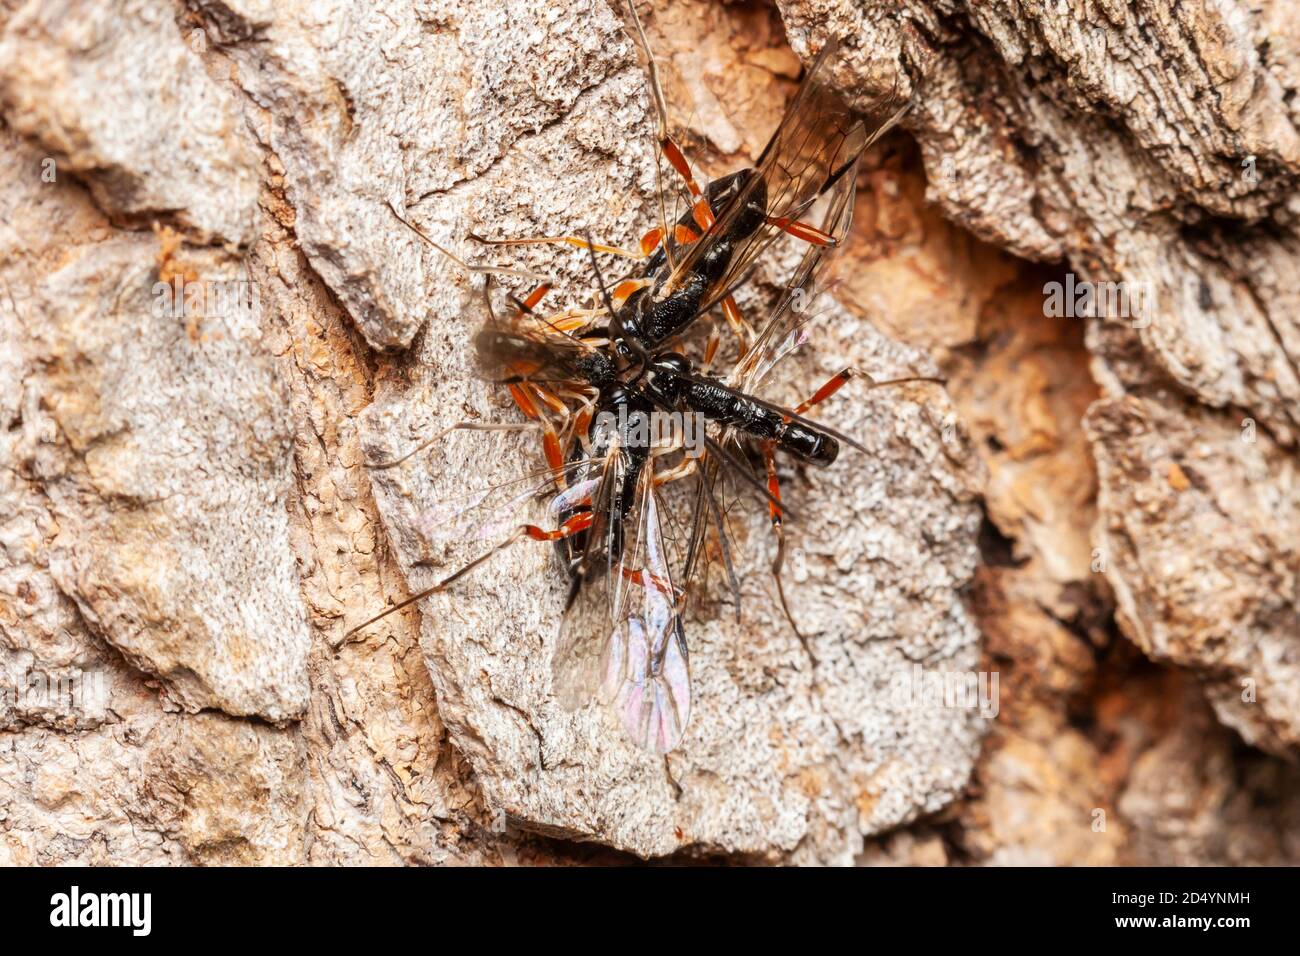 An aggregation of male Ichneumonid wasps (Rhyssella nitida), head-to-head with abdomens curled under, competing to mate with an emerging female. Stock Photo